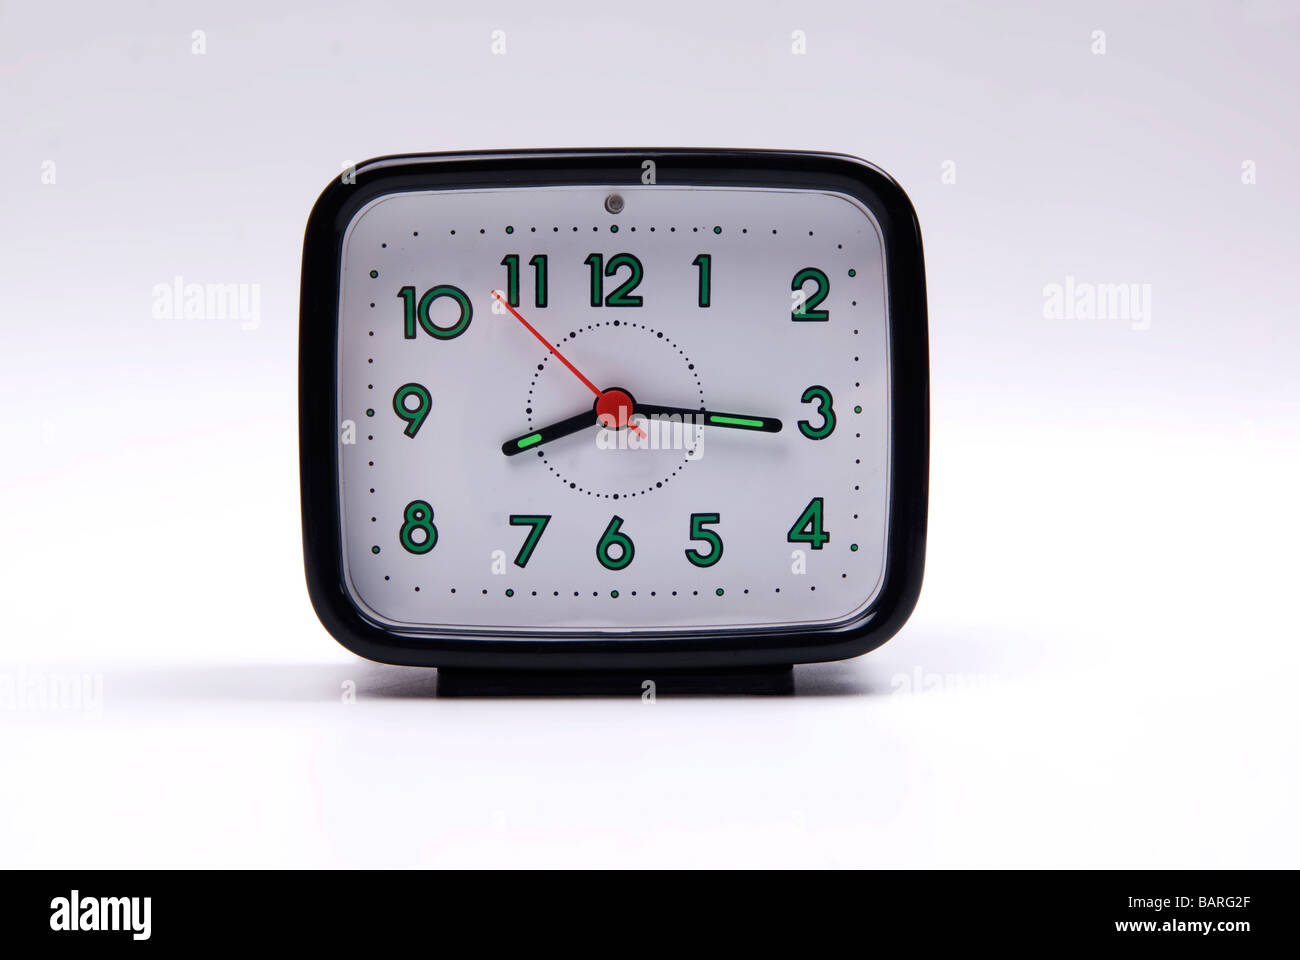 Alarm clock against a white background Stock Photo